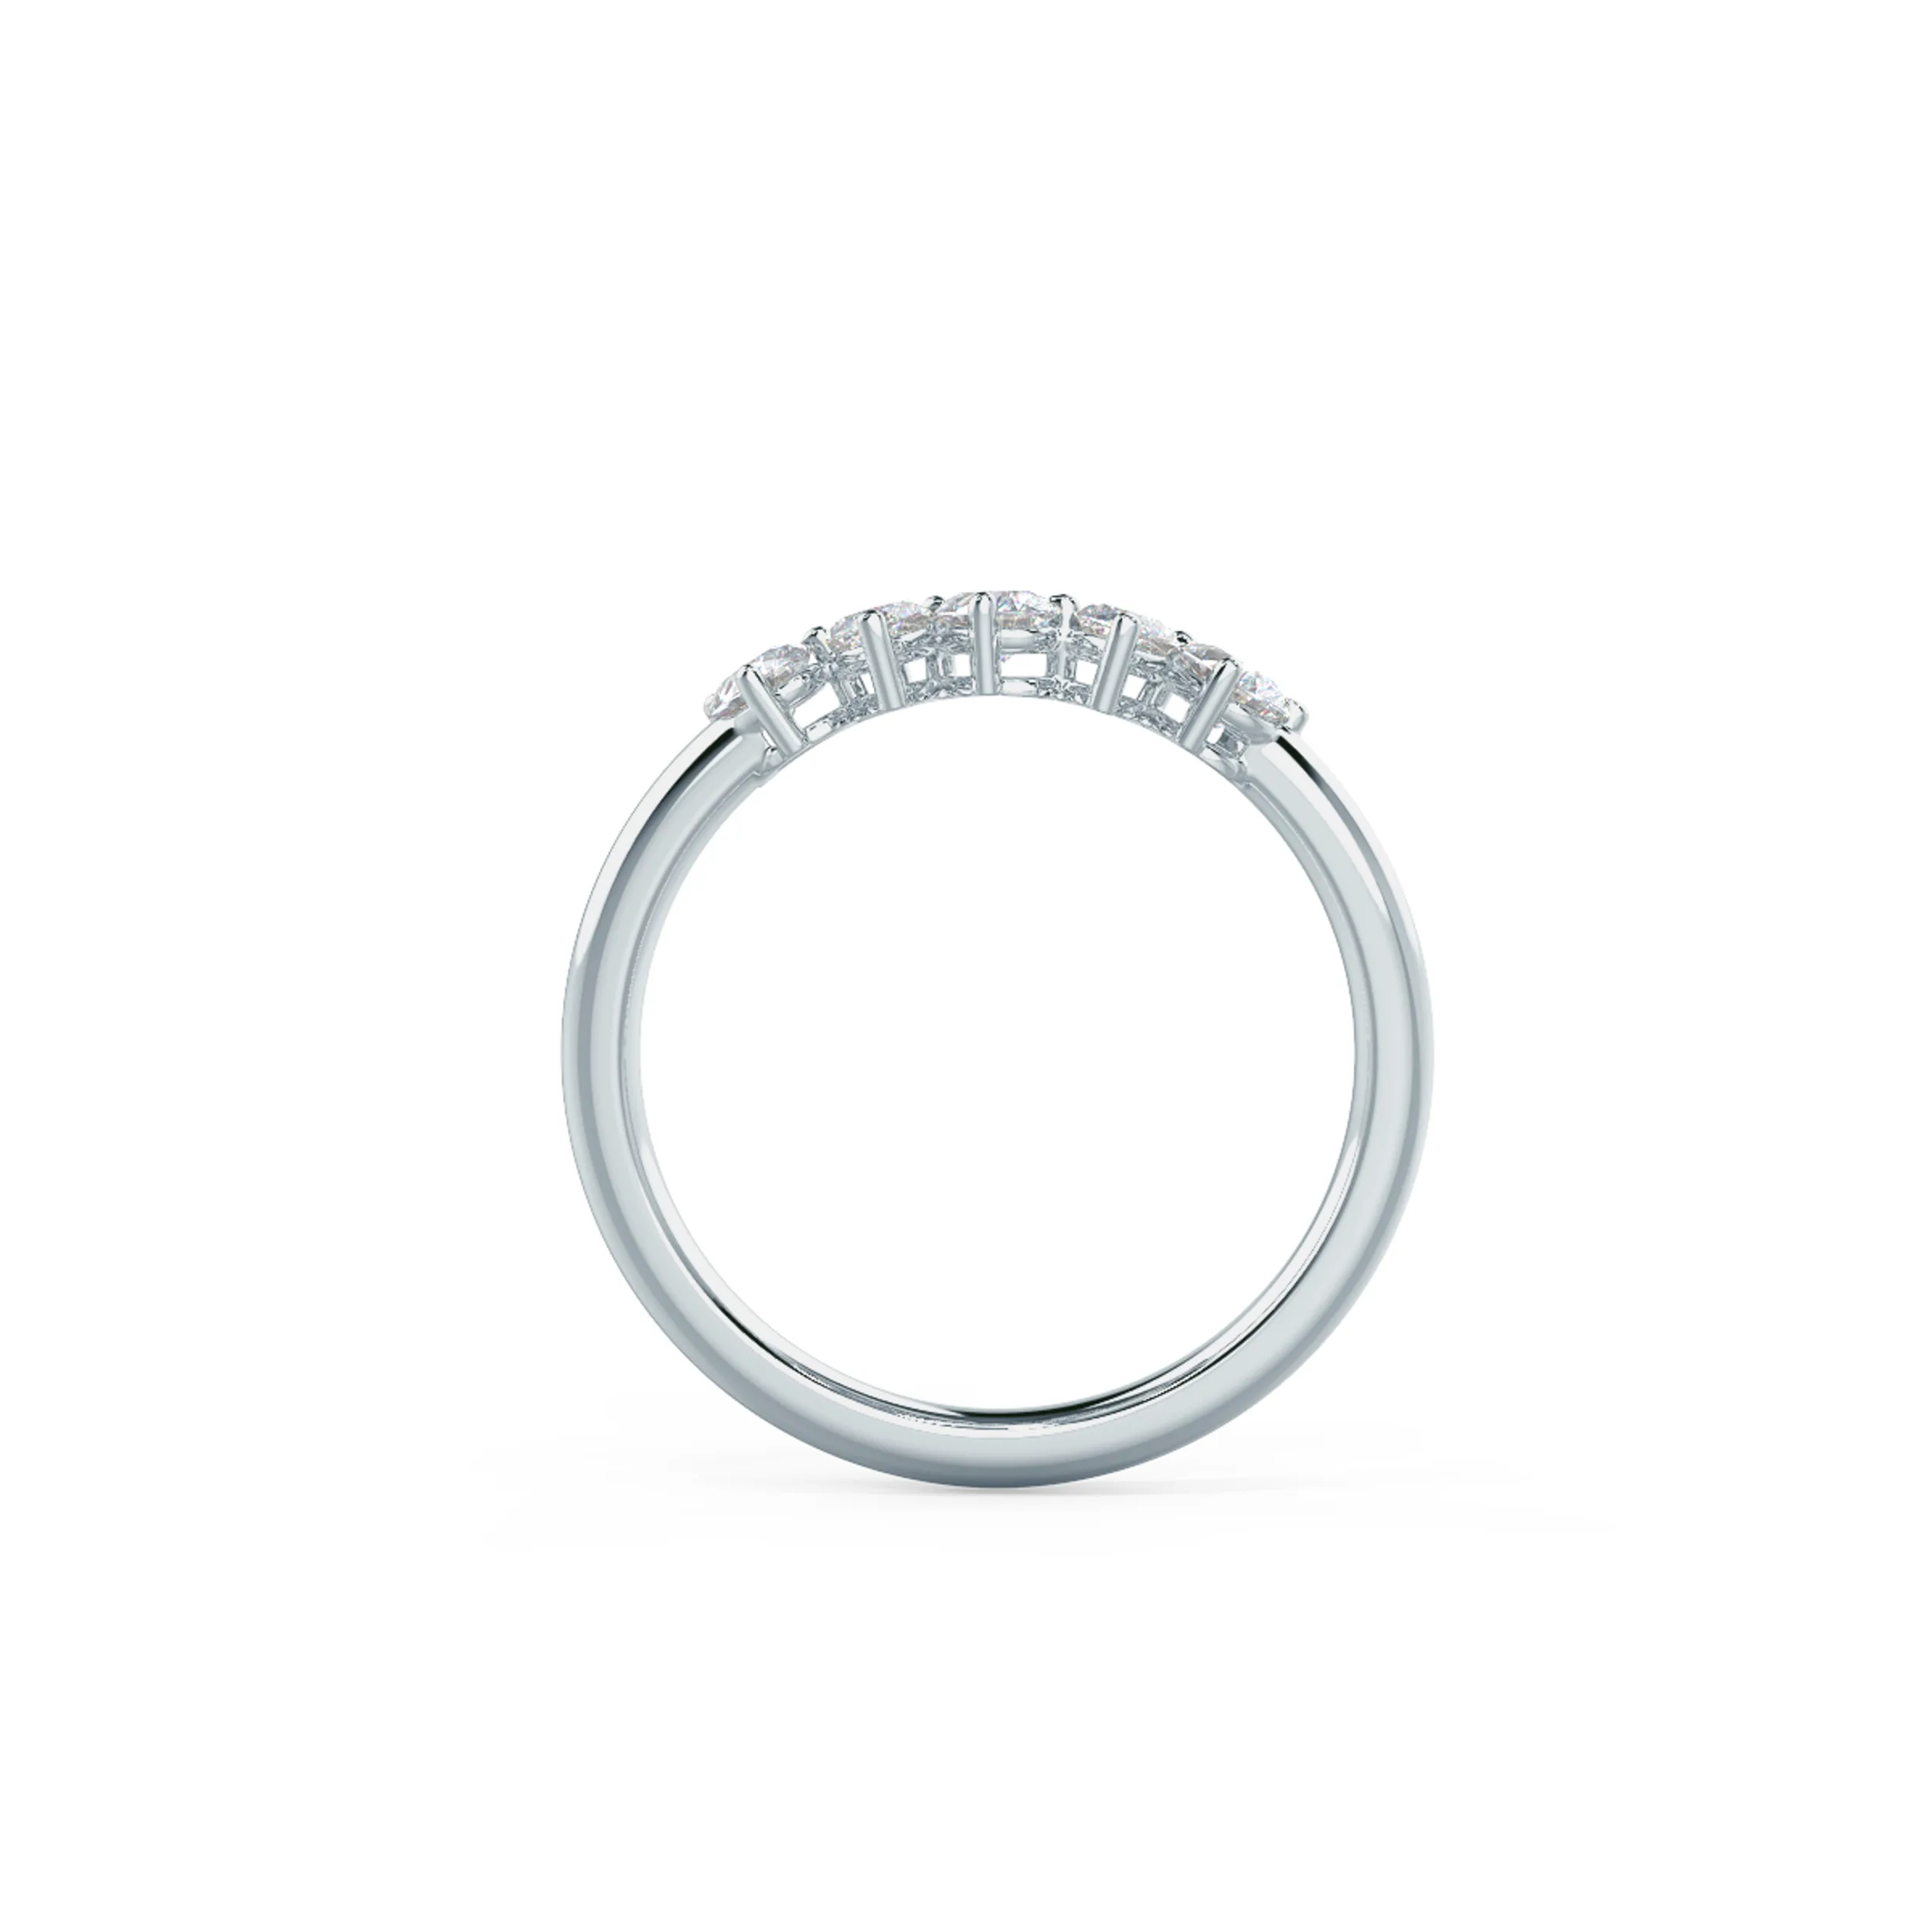 Hand Selected 0.5 ct Created Diamonds Lauren Five Stone in 18k White Gold (Profile View)